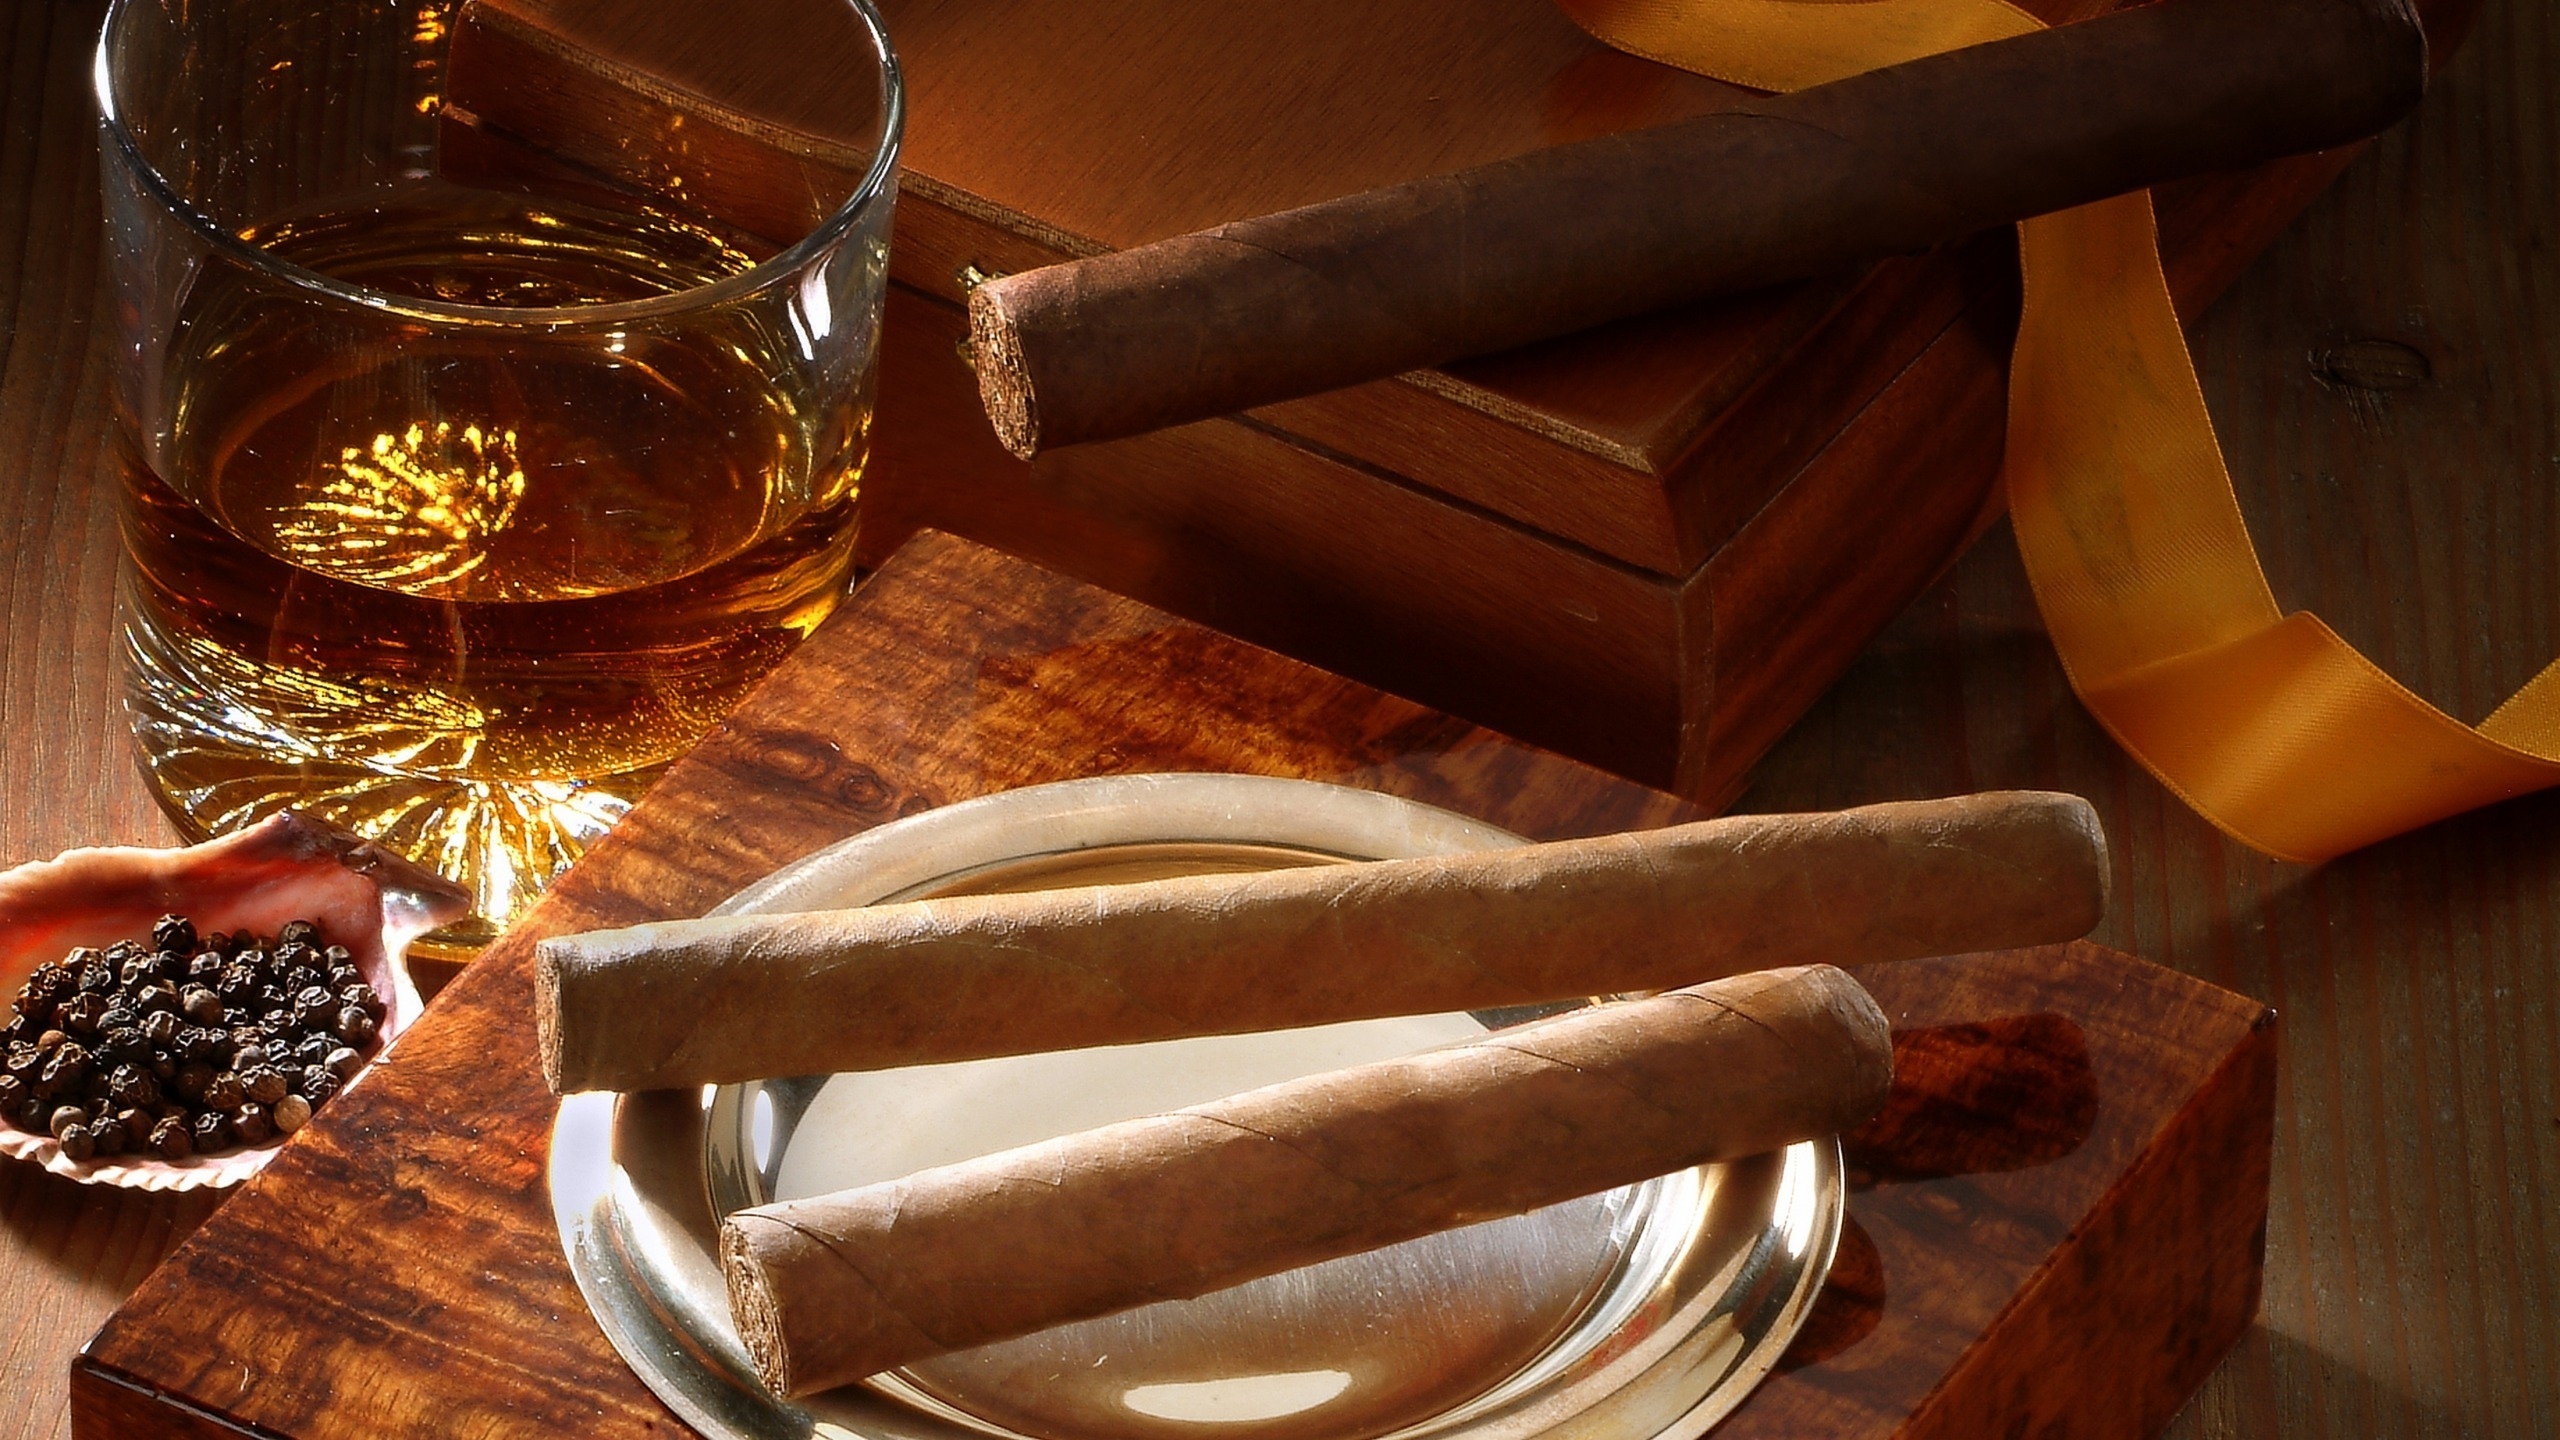 Whiskey and Cigars for 2560x1440 HDTV resolution